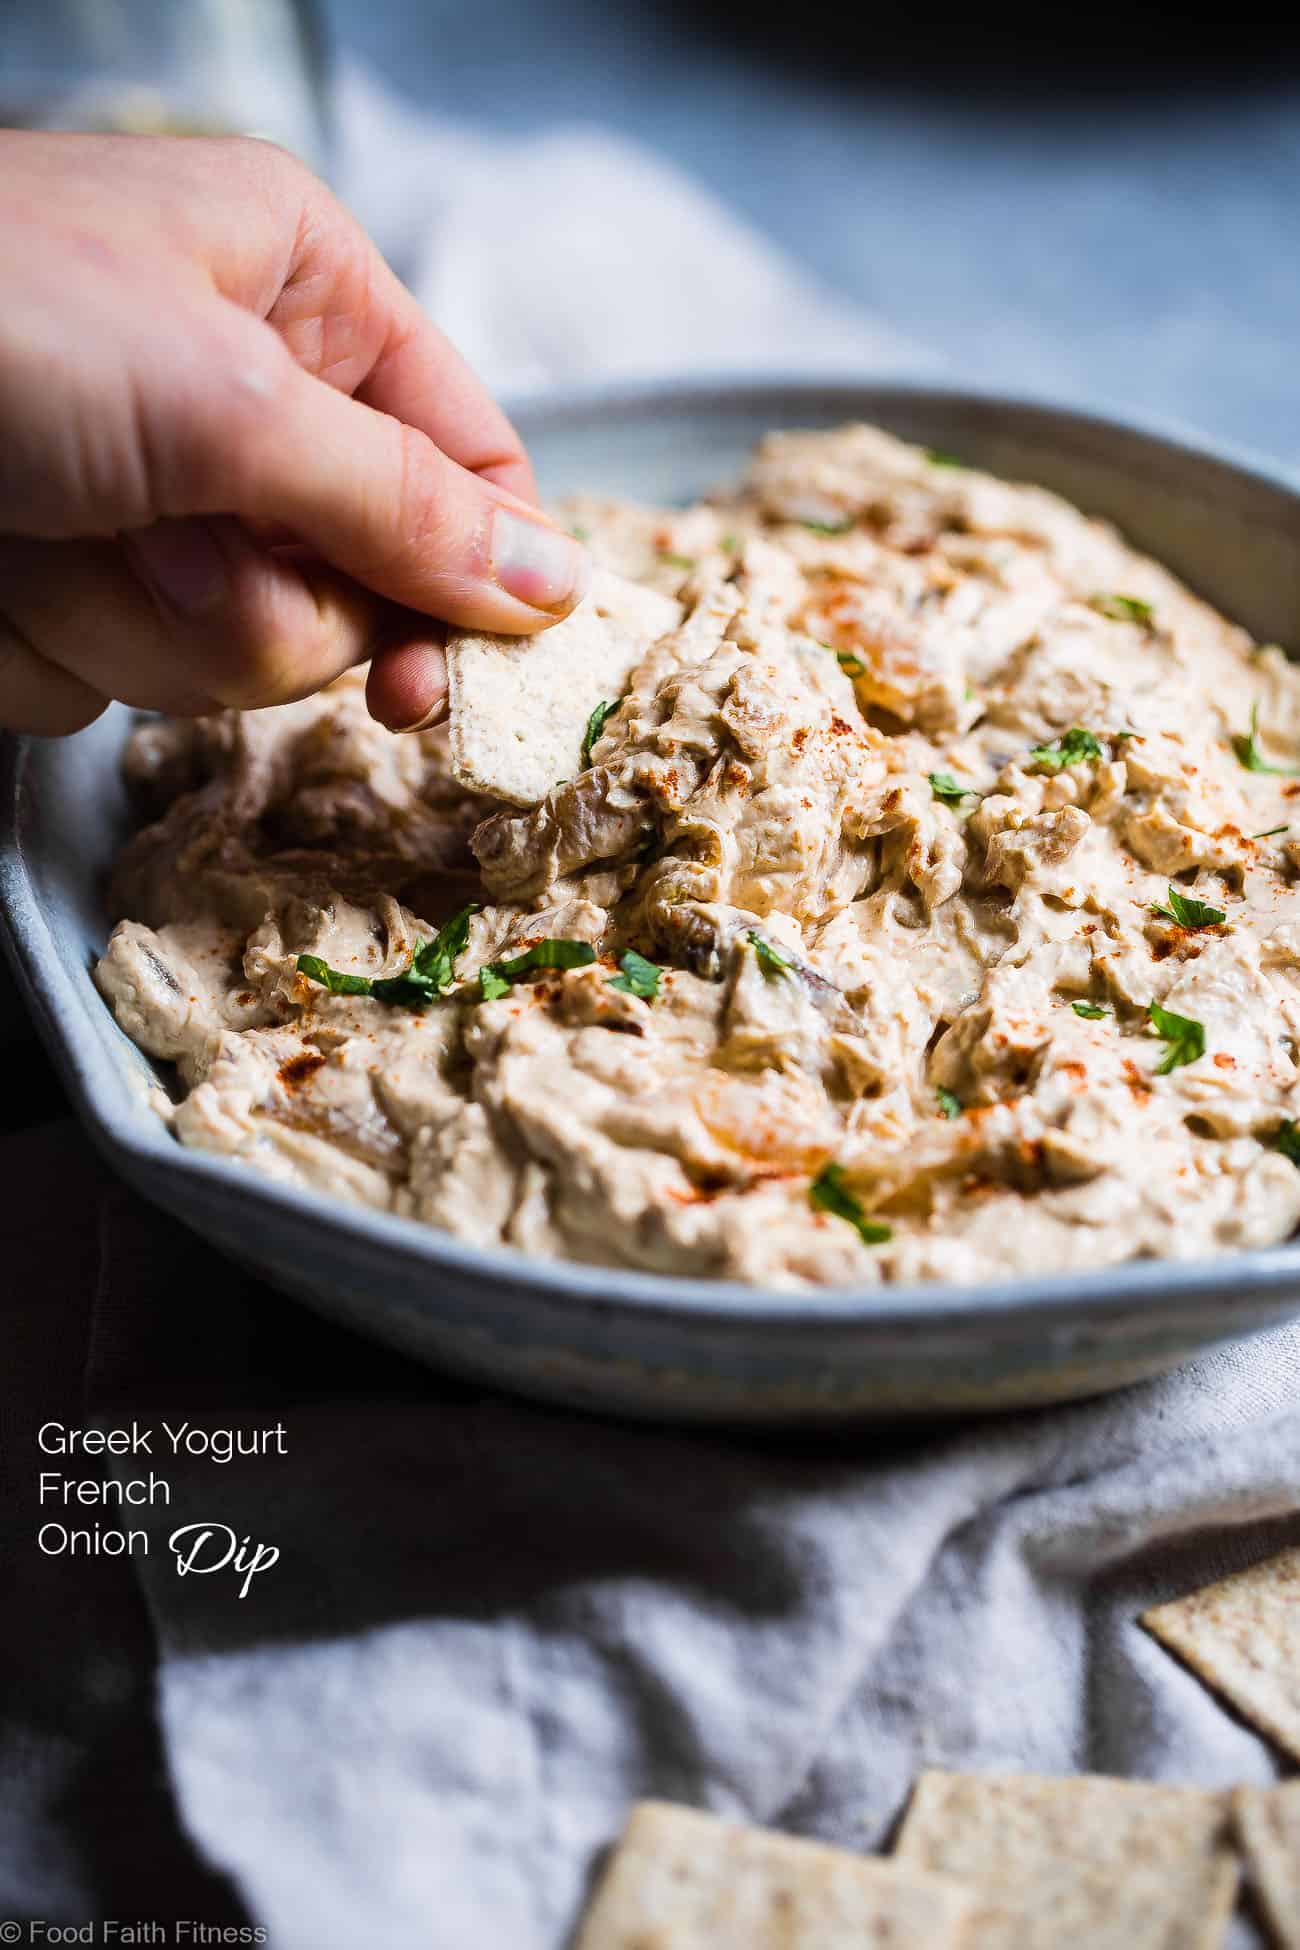 Easy Greek Yogurt French Onion Dip - This quick and easy French onion dip is a healthy, low carb, gluten free and protein packed appetizer that is perfect for parties! Only 110 calories and so creamy! | Foodfaithfitness.com | @FoodFaithFit